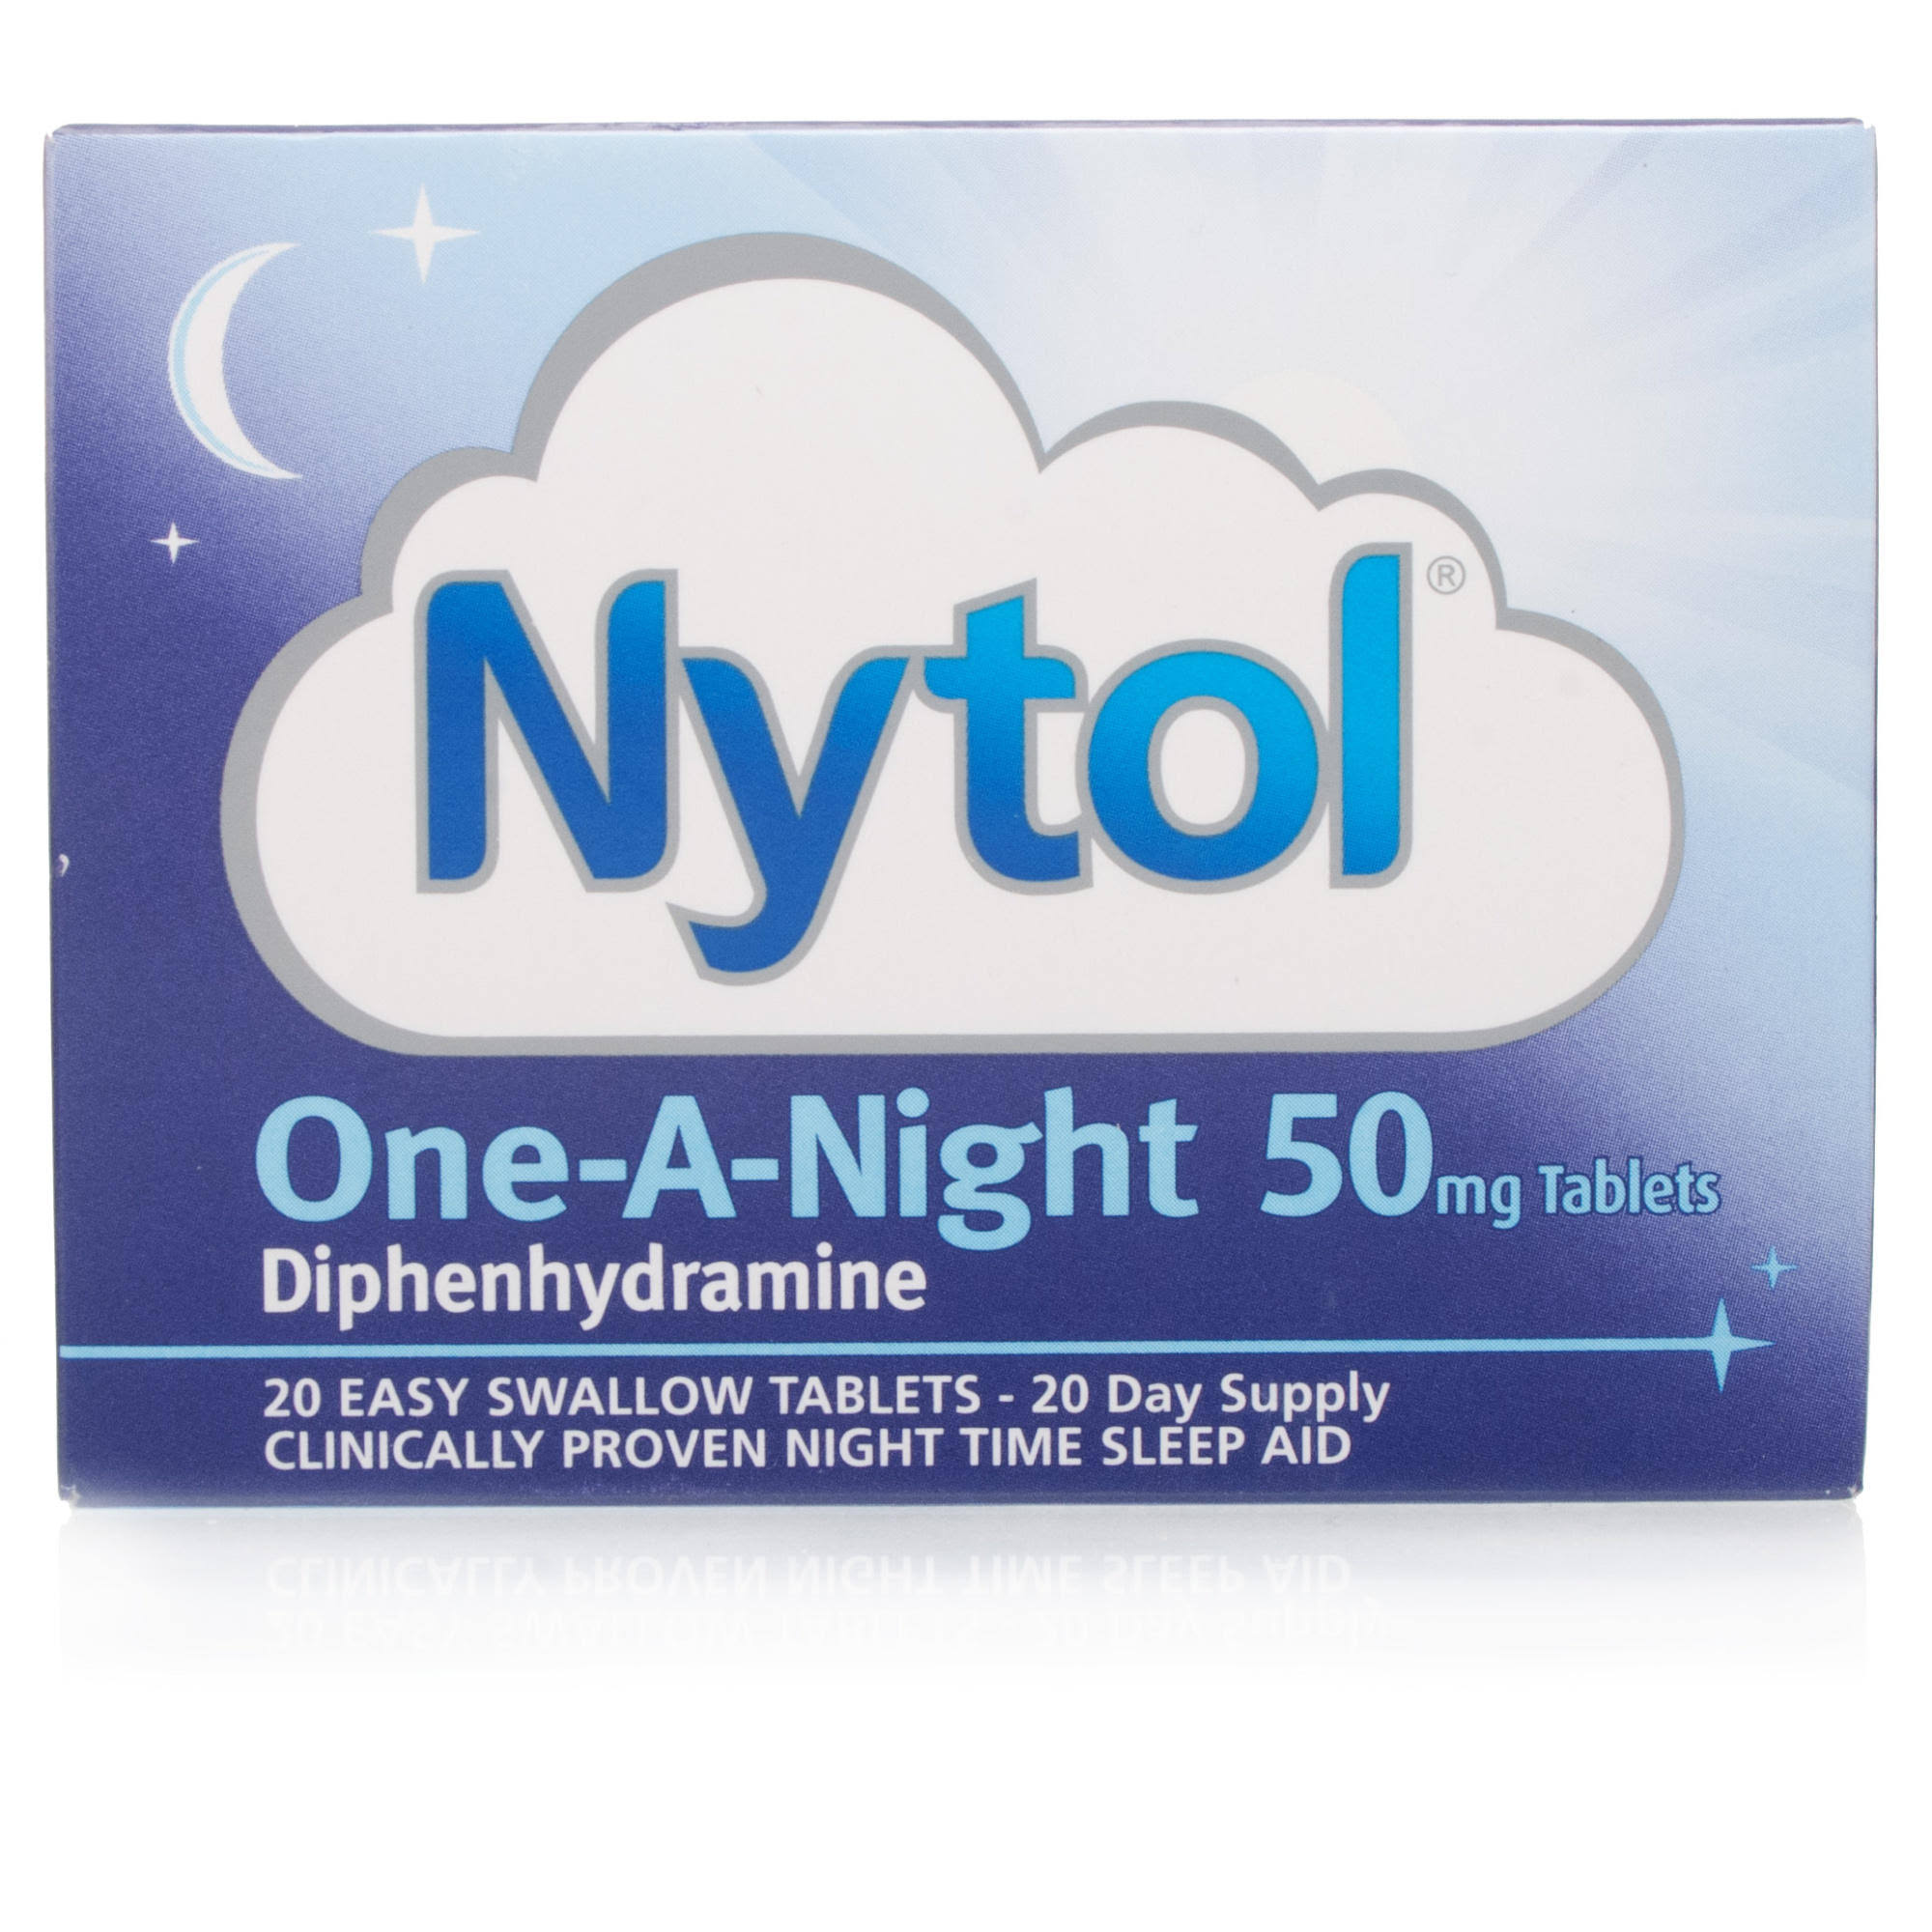 Nytol One-A-Night Diphenhydramine - 50mg, 20 Tablets